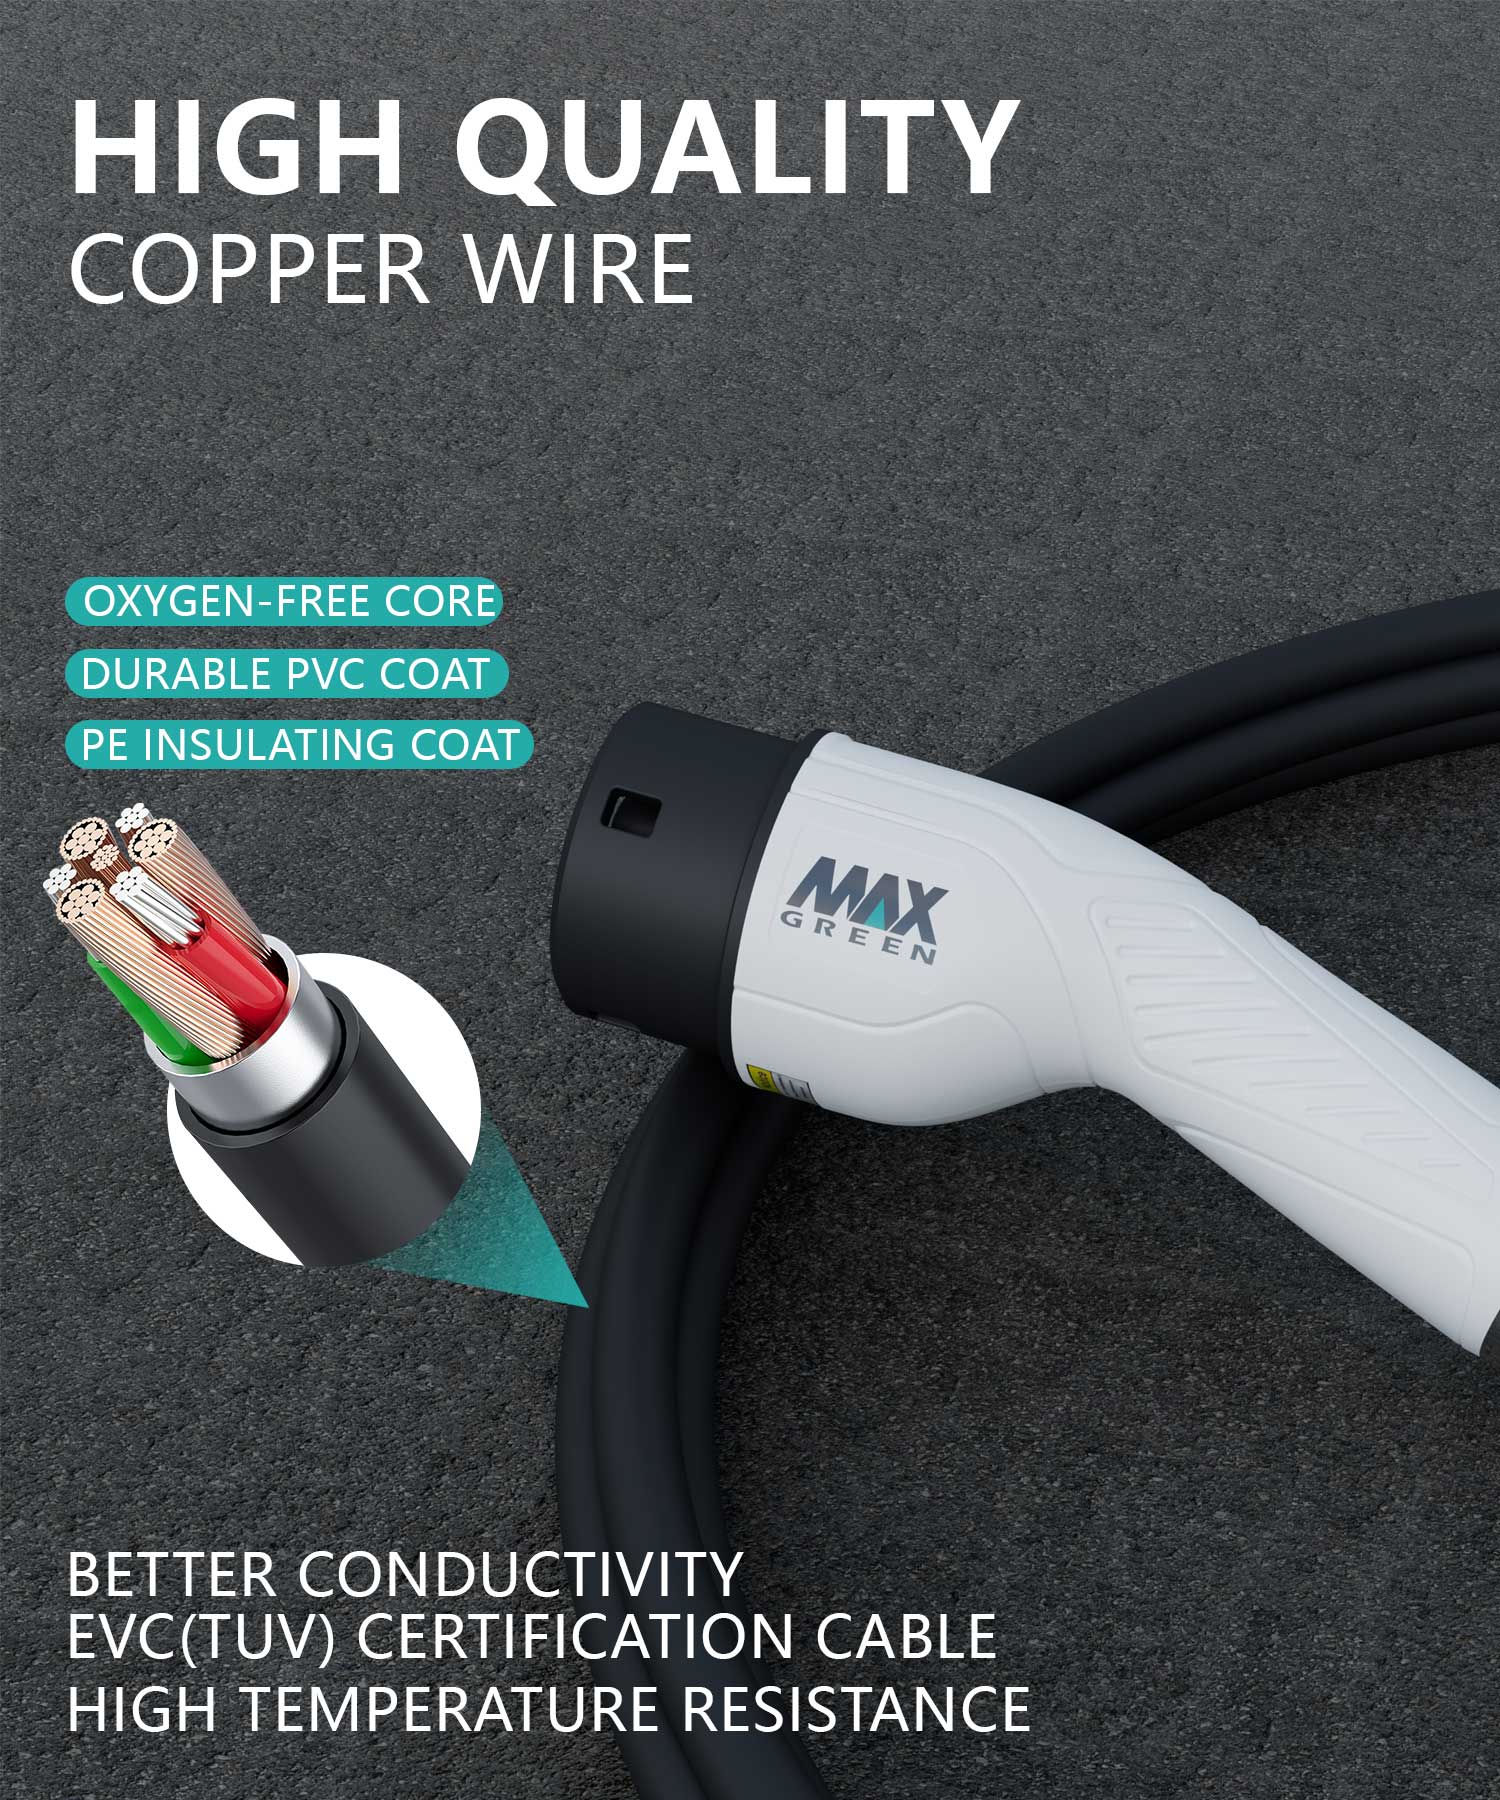 MAXGREEN Type 2 EV Charging cable Featuring high-grade copper wires and a reinforced insulation jacket, it offers unparalleled protection against everyday wear and tear.